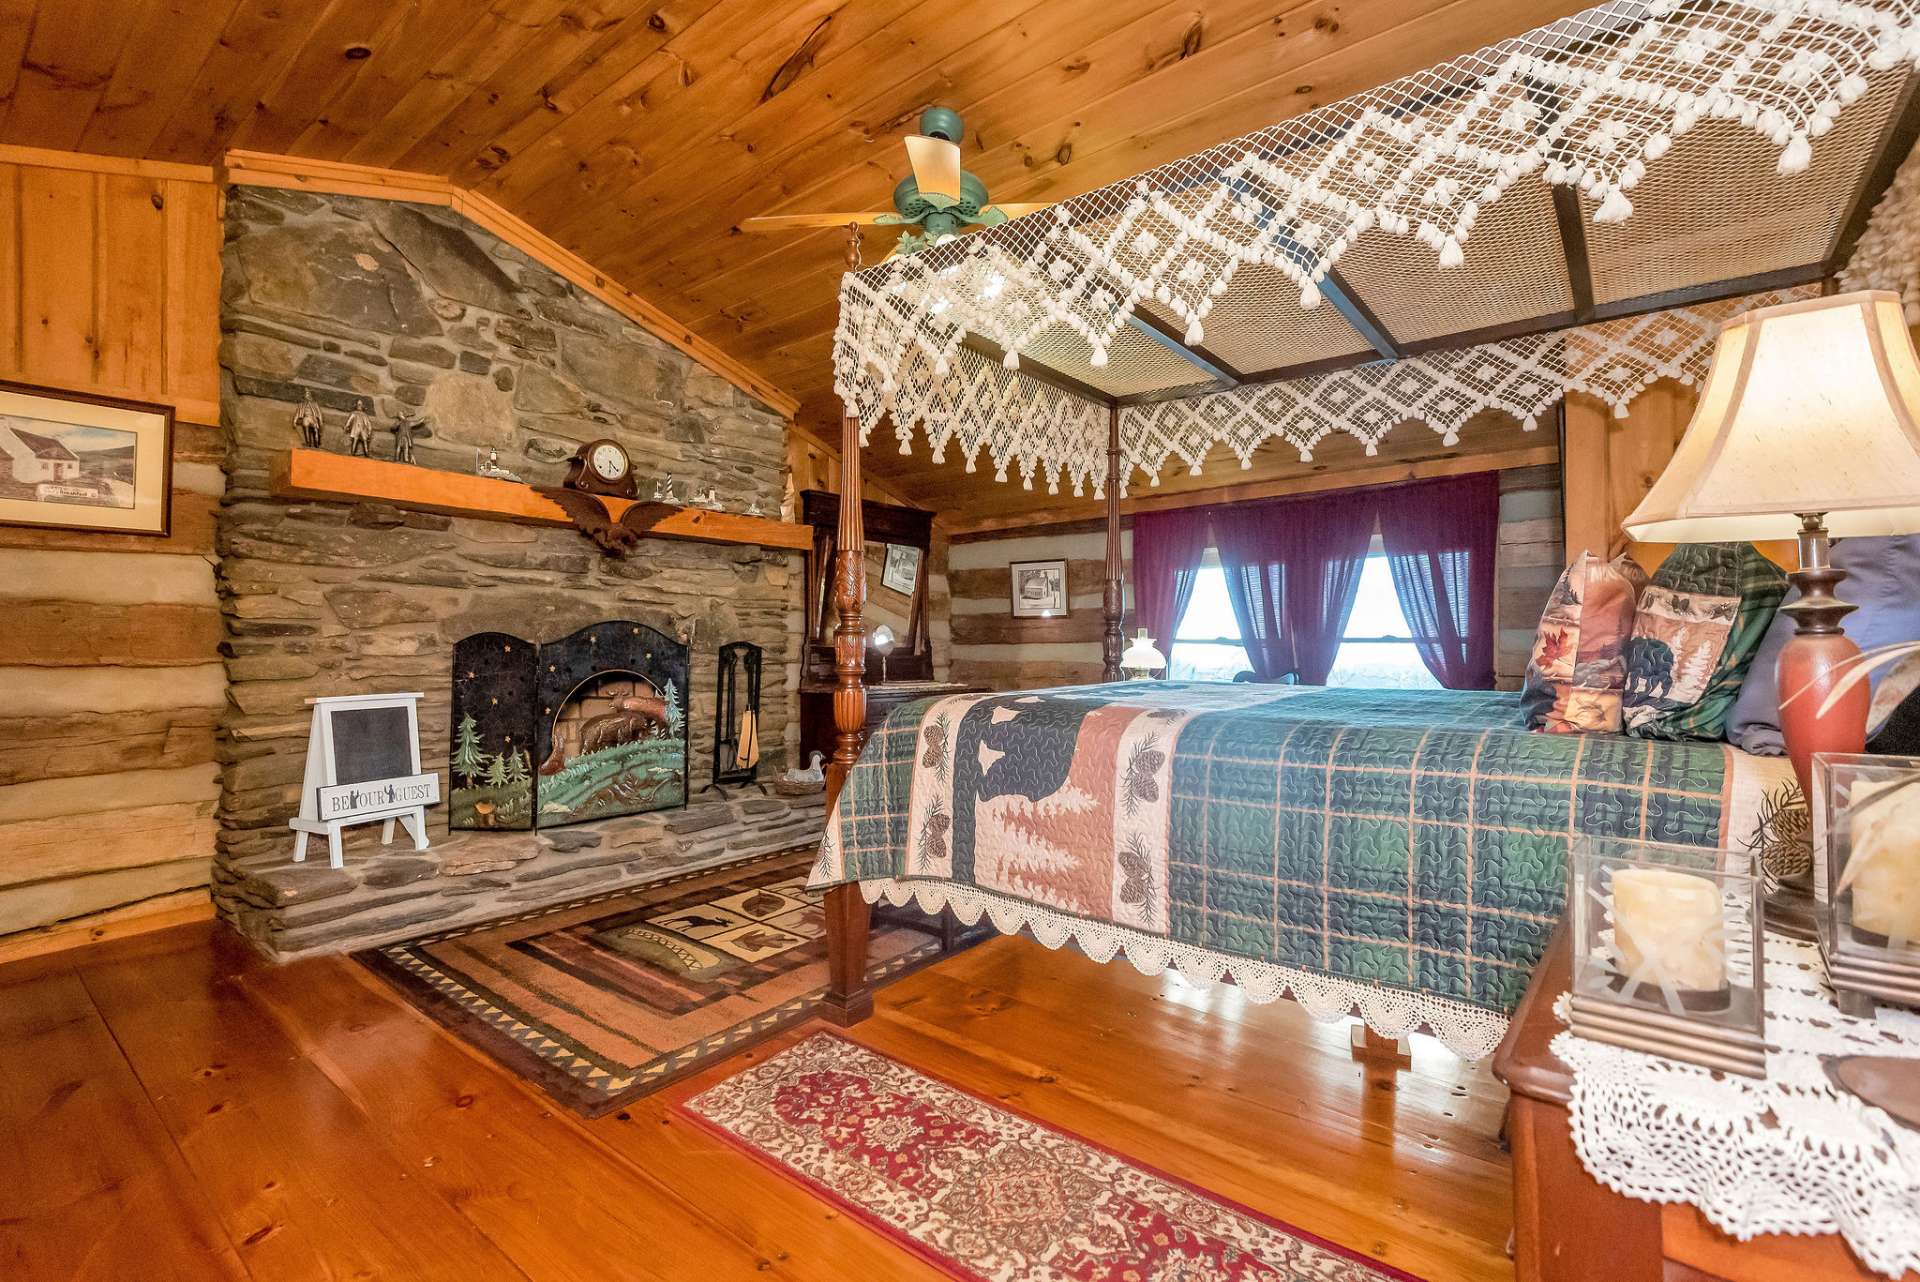 The first upper-level guest bedroom offers a wood-burning fireplace, vaulted ceilings, and view.